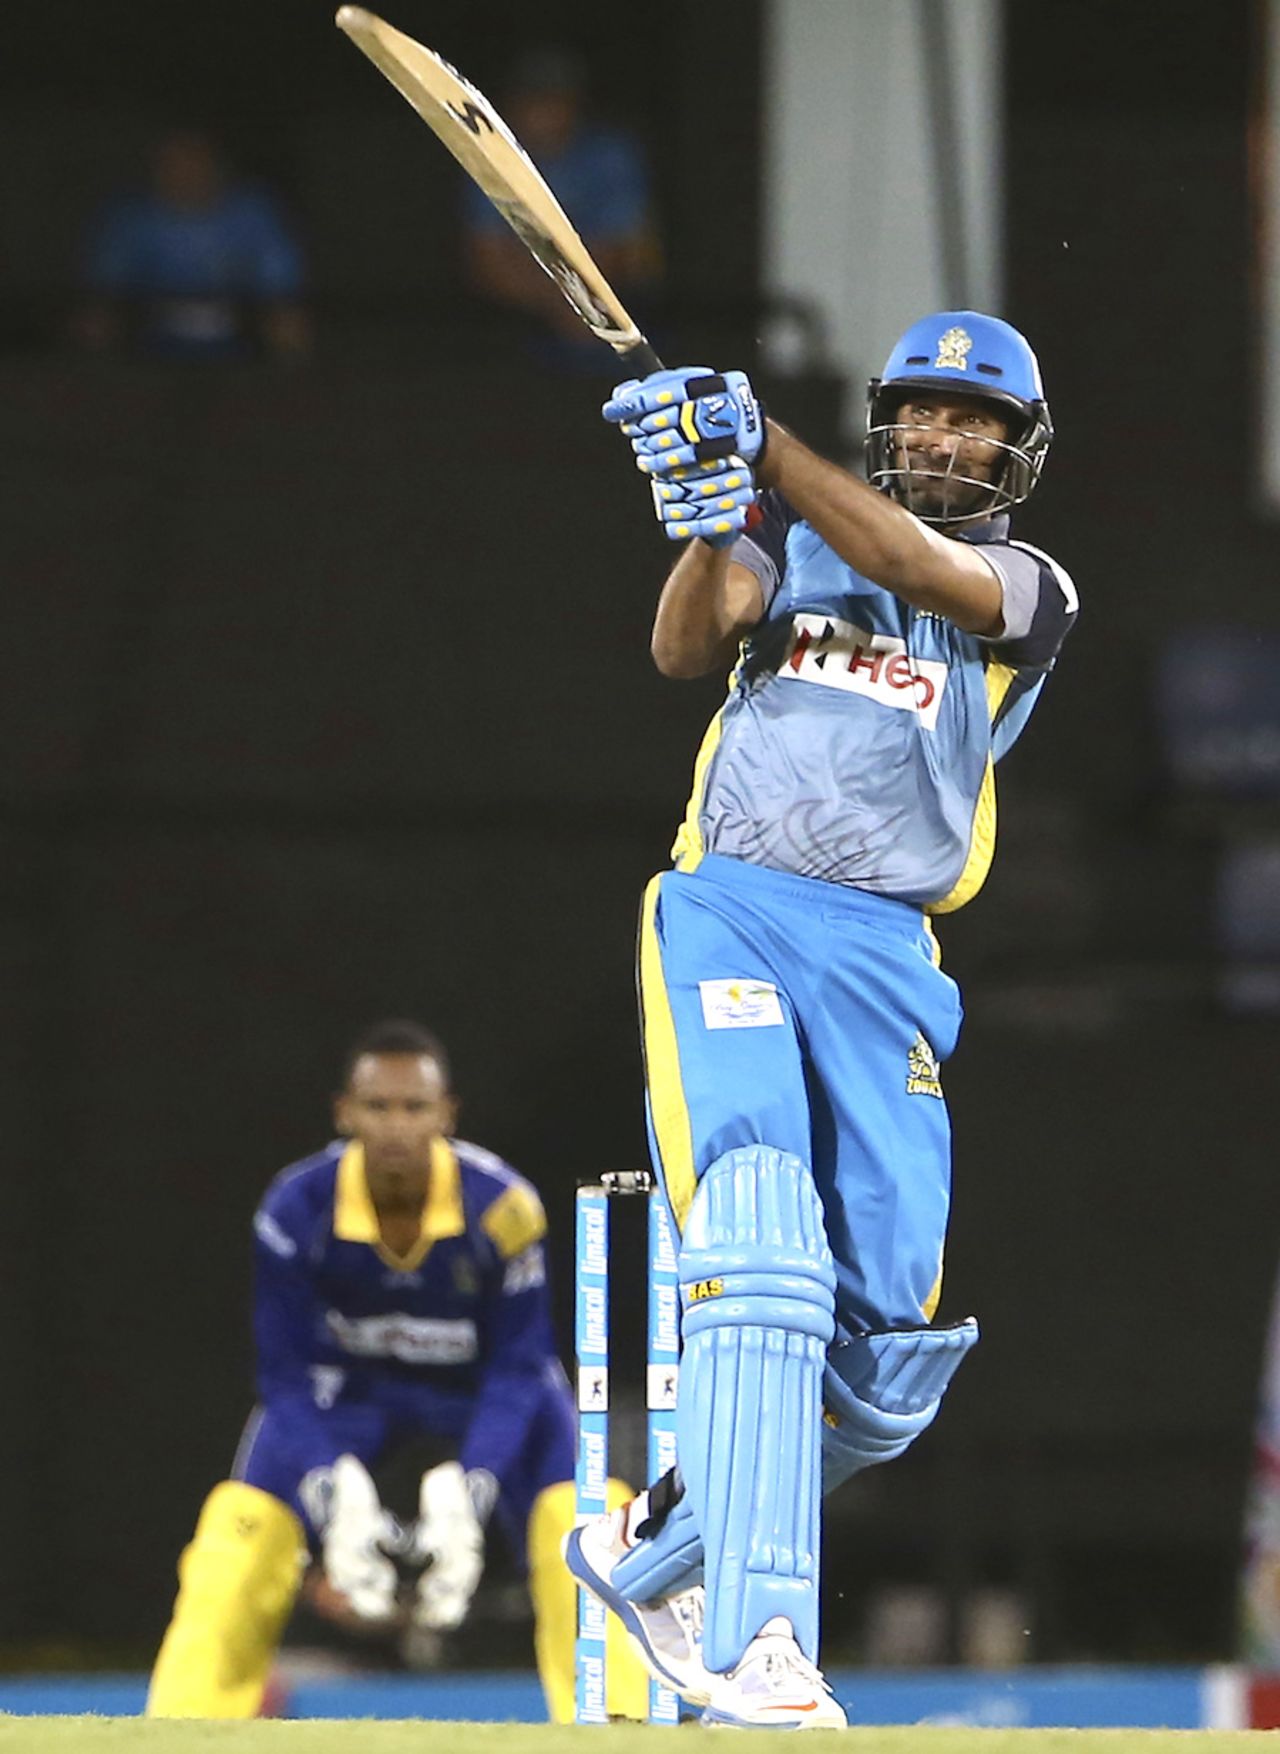 Sohail Tanvir pulls one to the leg side, St Lucia Zouks v Barbados Tridents, CPL 2014, Gros Islet, July 31, 2014